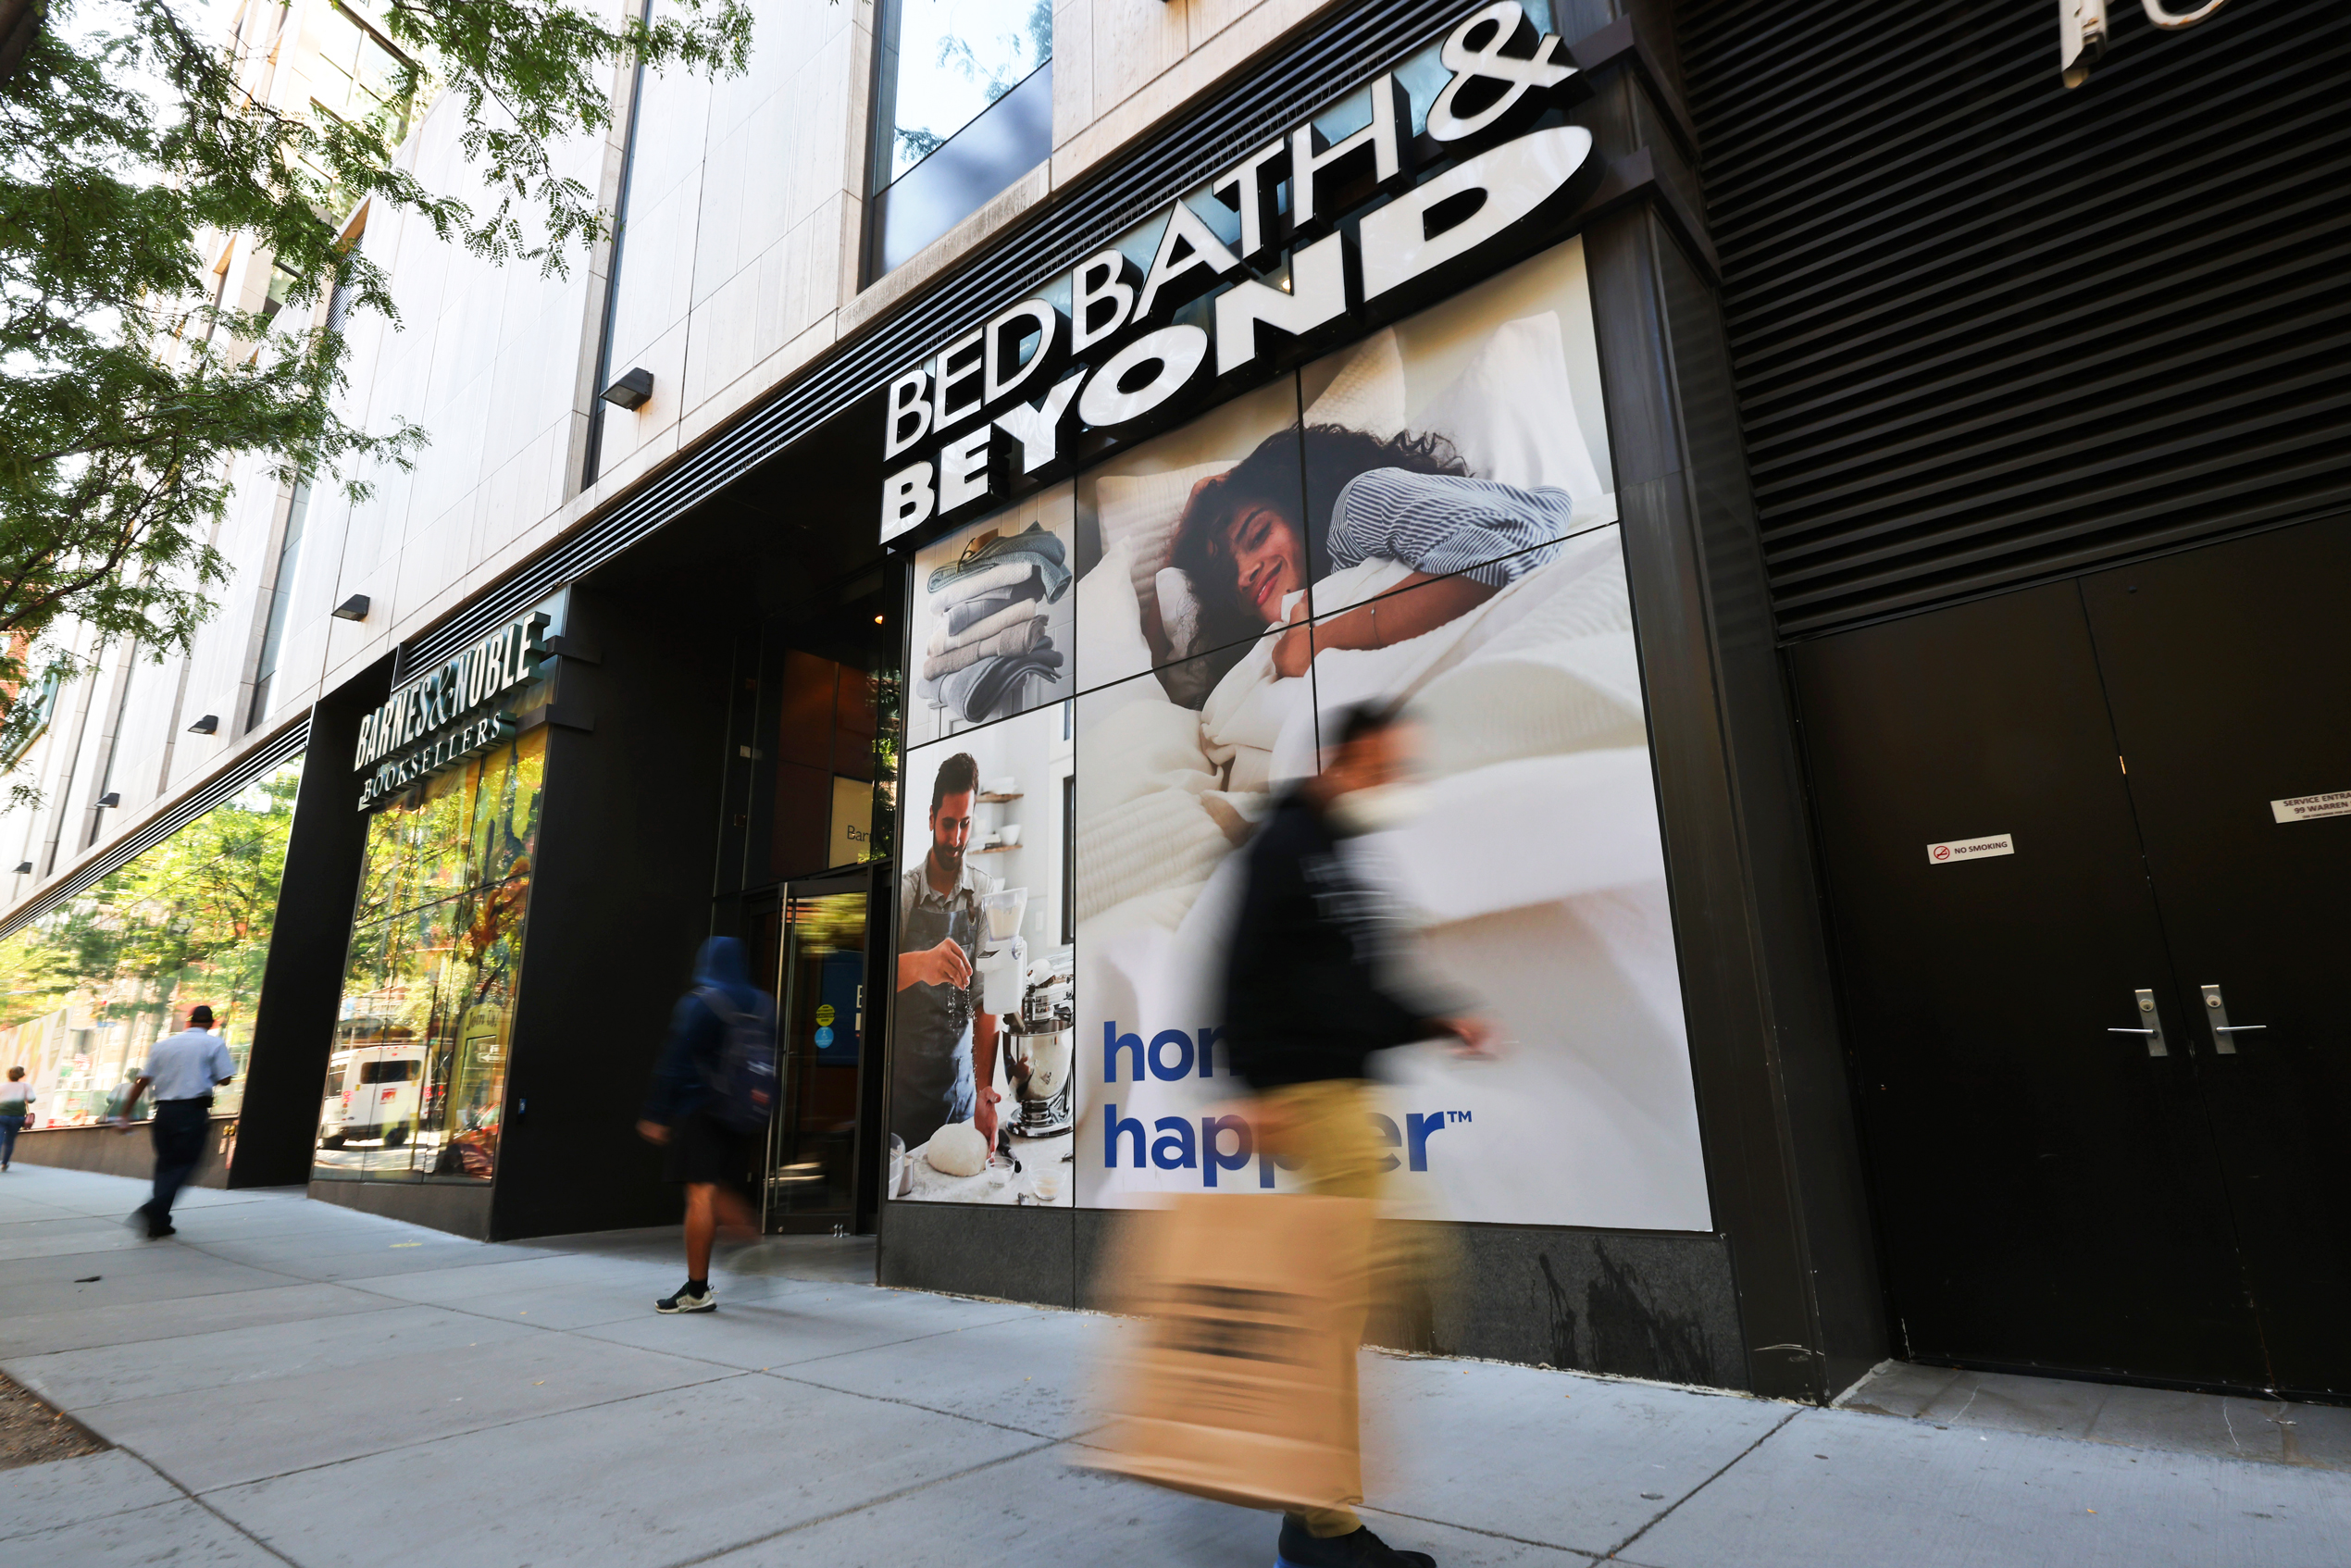 I Visited a Doomed Bed Bath & Beyond As the Company Enters Bankruptcy